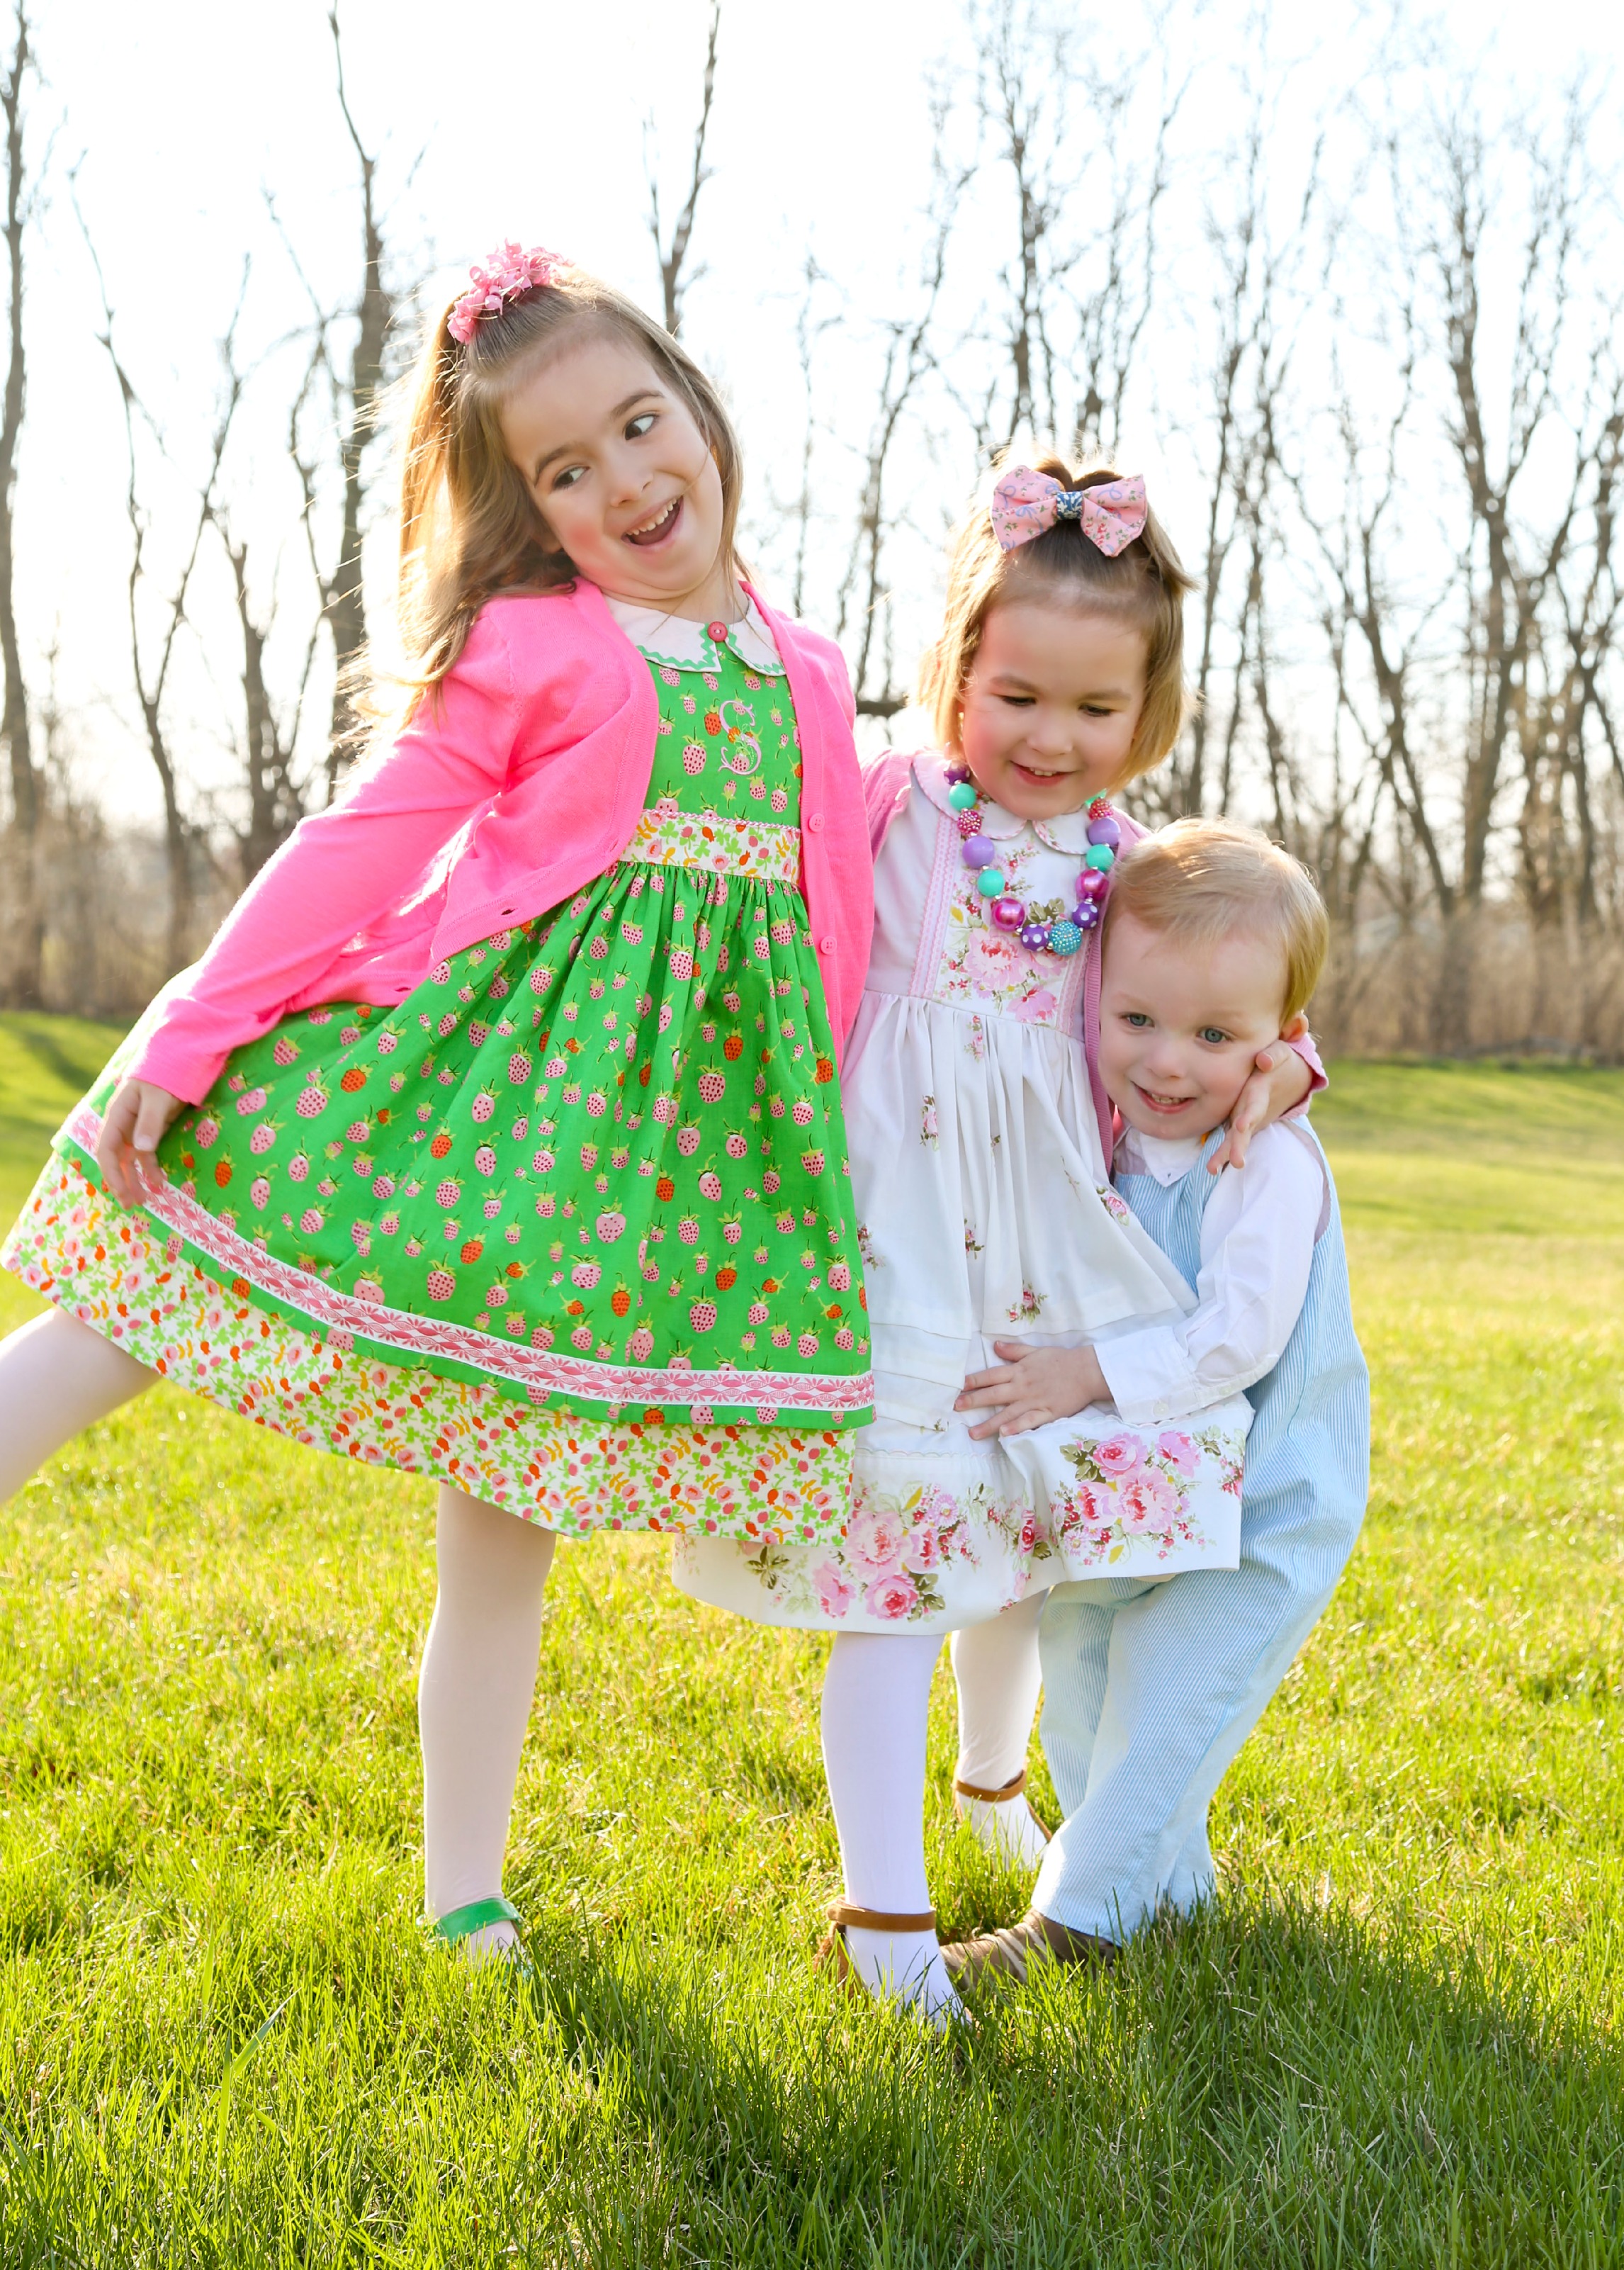 Simple Easter Outfits For Girls - rotatorqueen